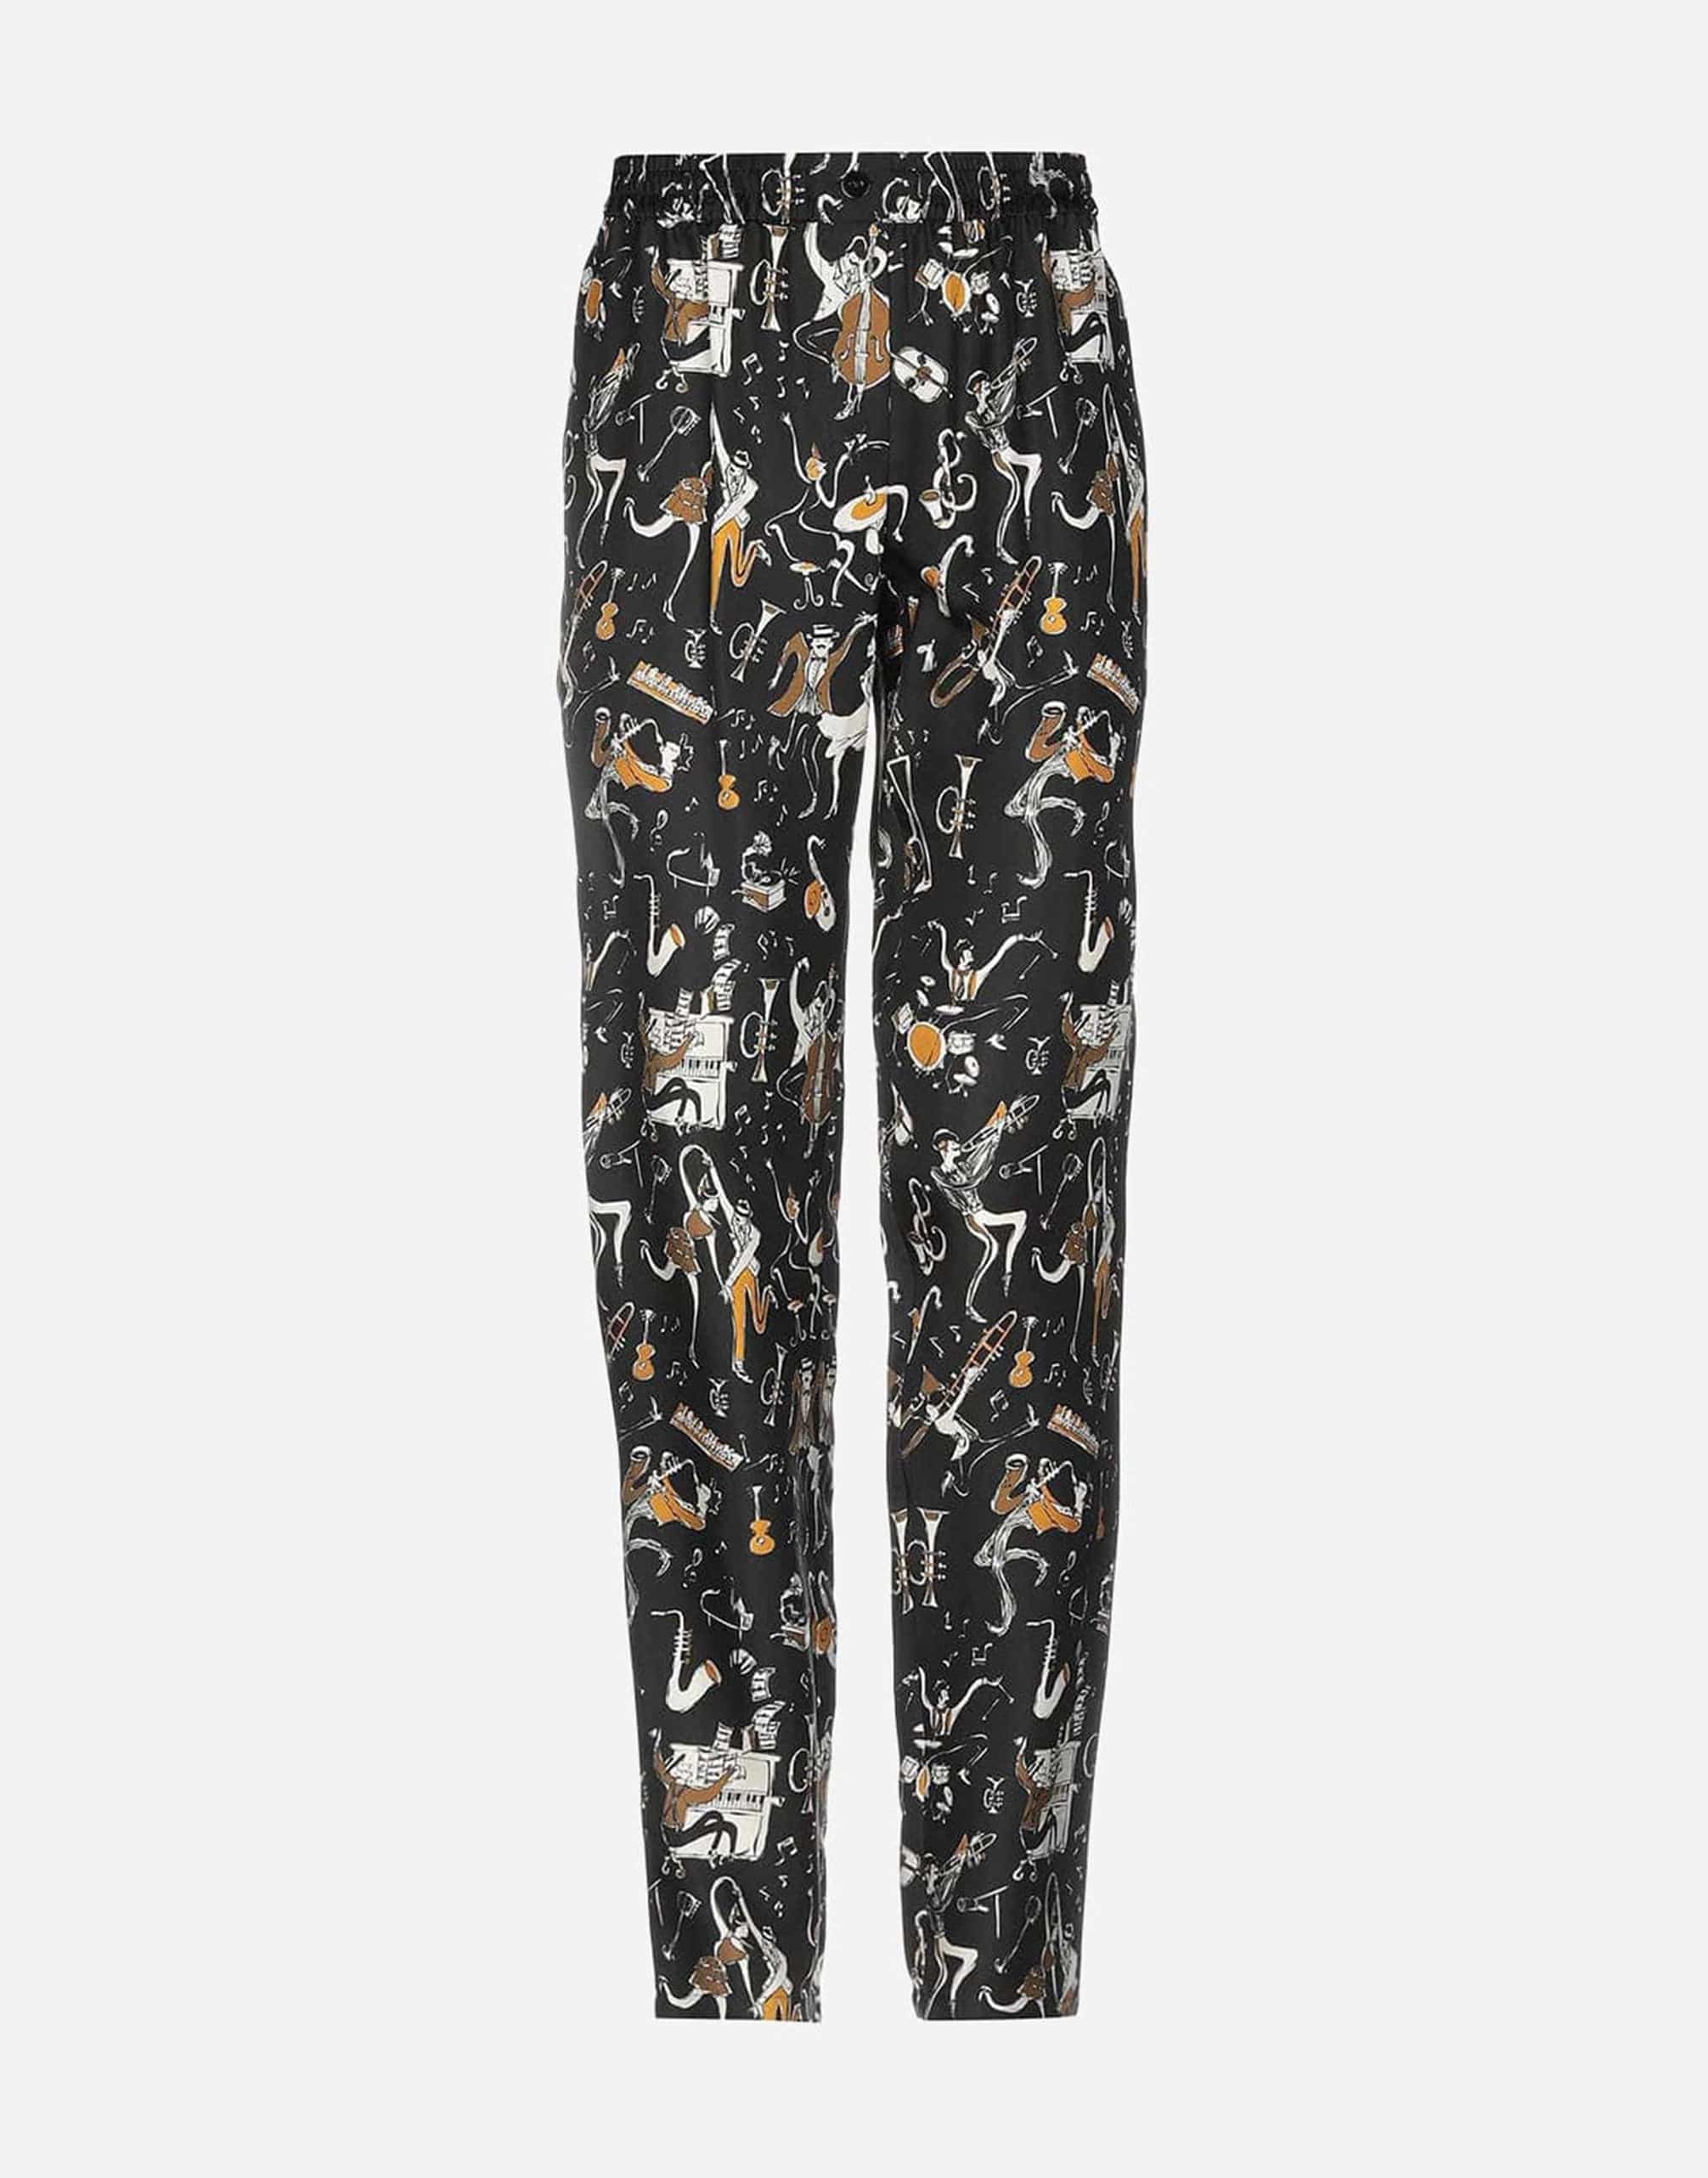 Dolce & Gabbana Musical Instrument Print Casual Trousers